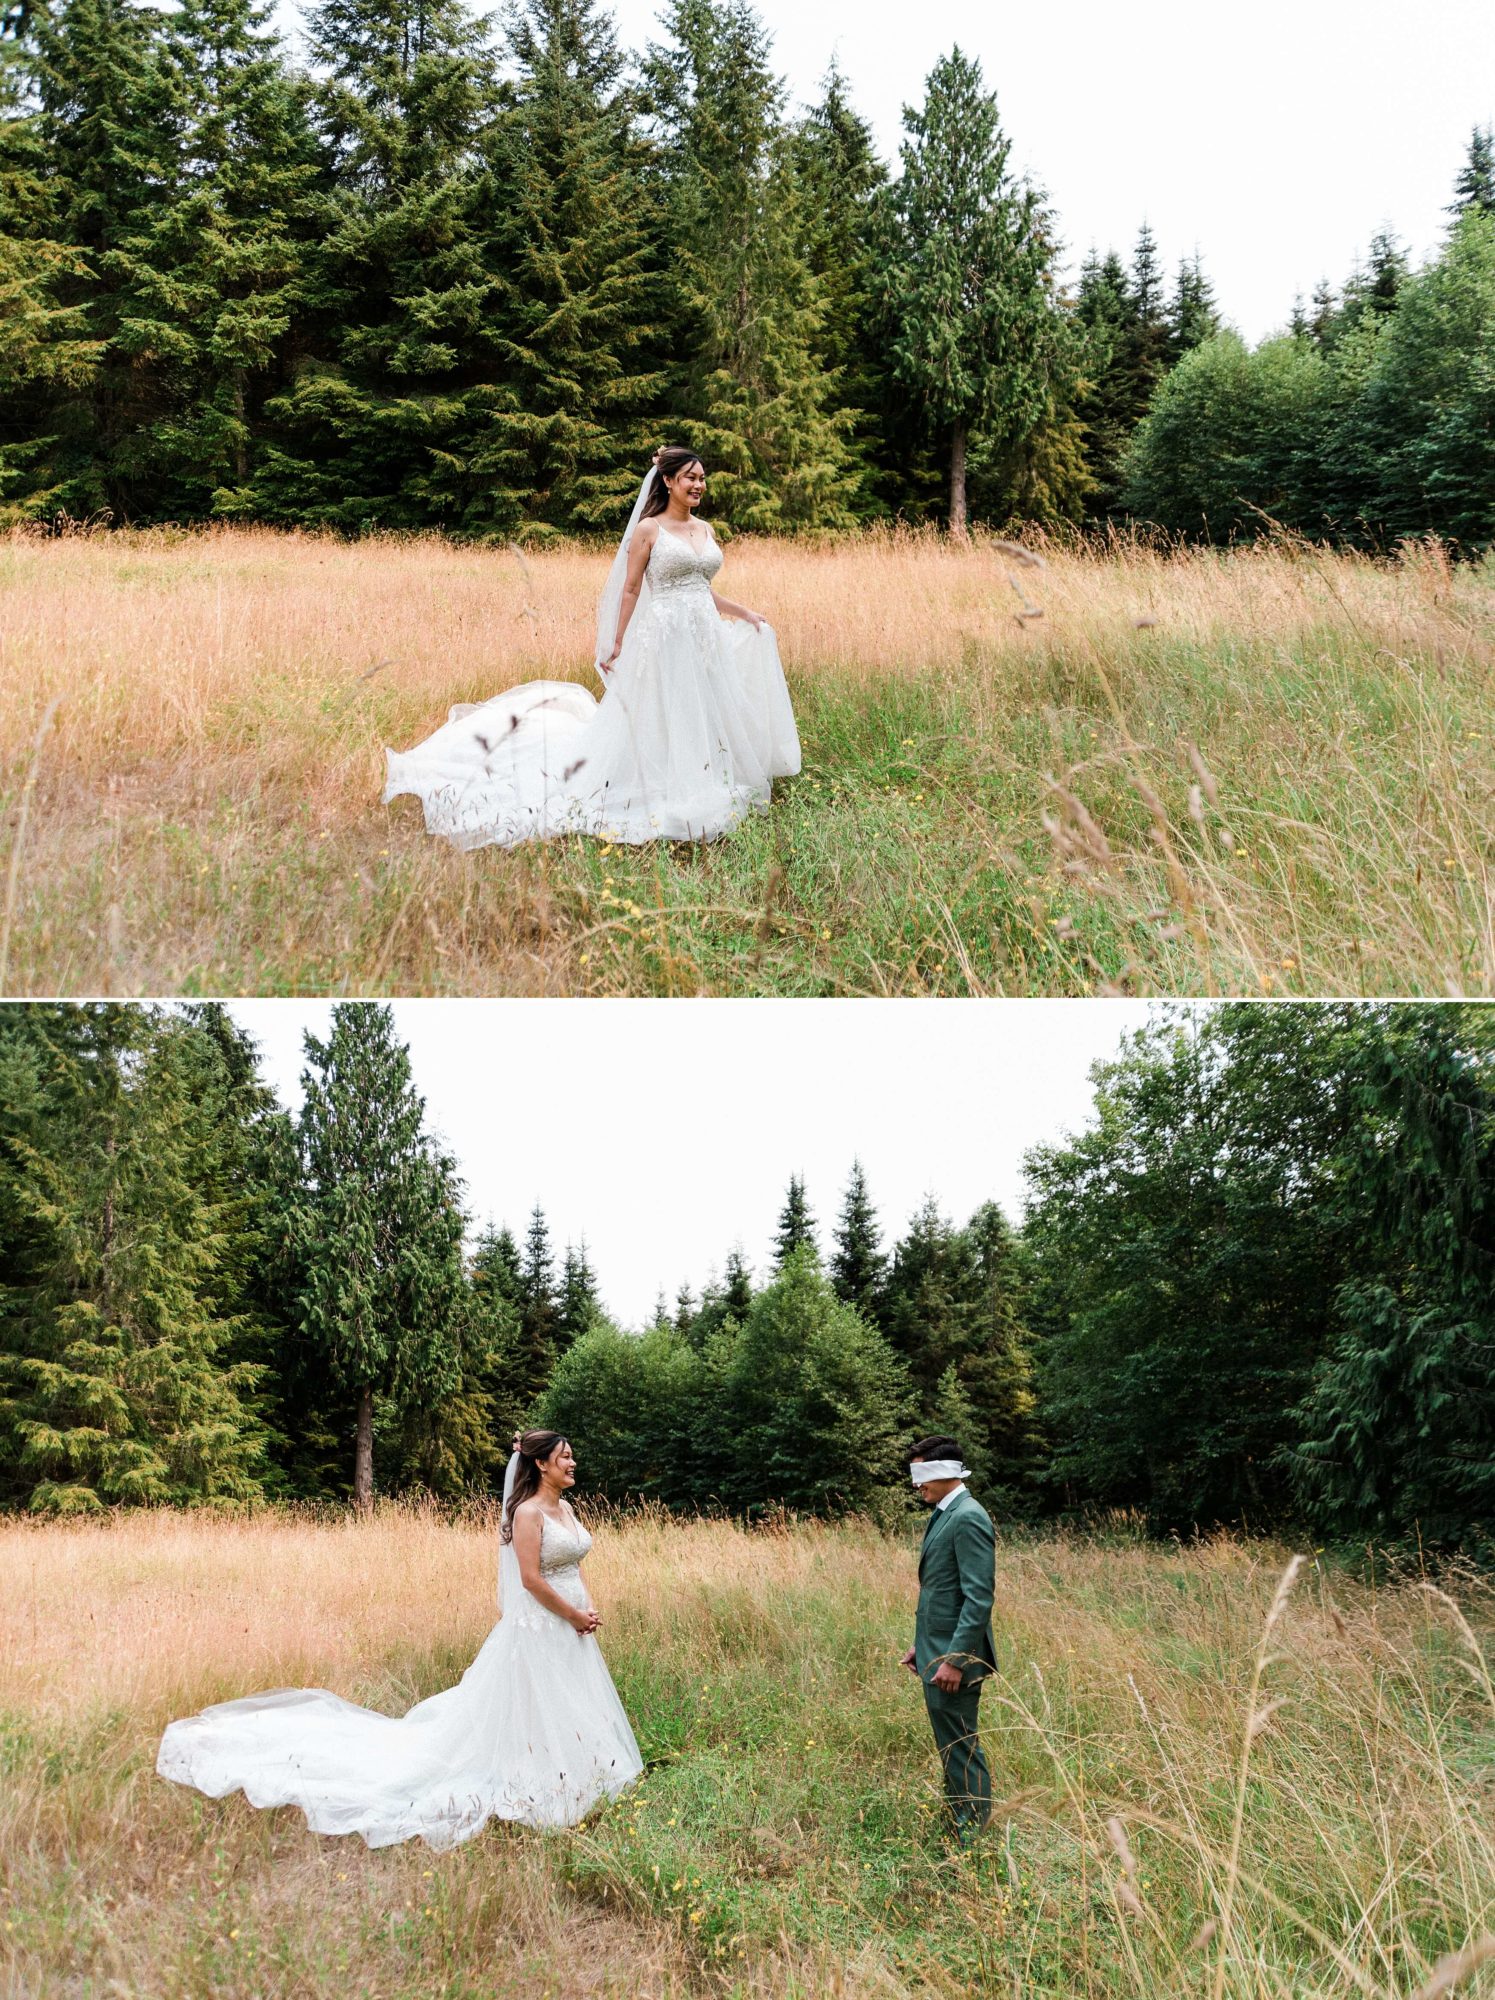 Bride and Groom in a meadow at Misty Clover Farm Olympic Peninsula Wedding Venue